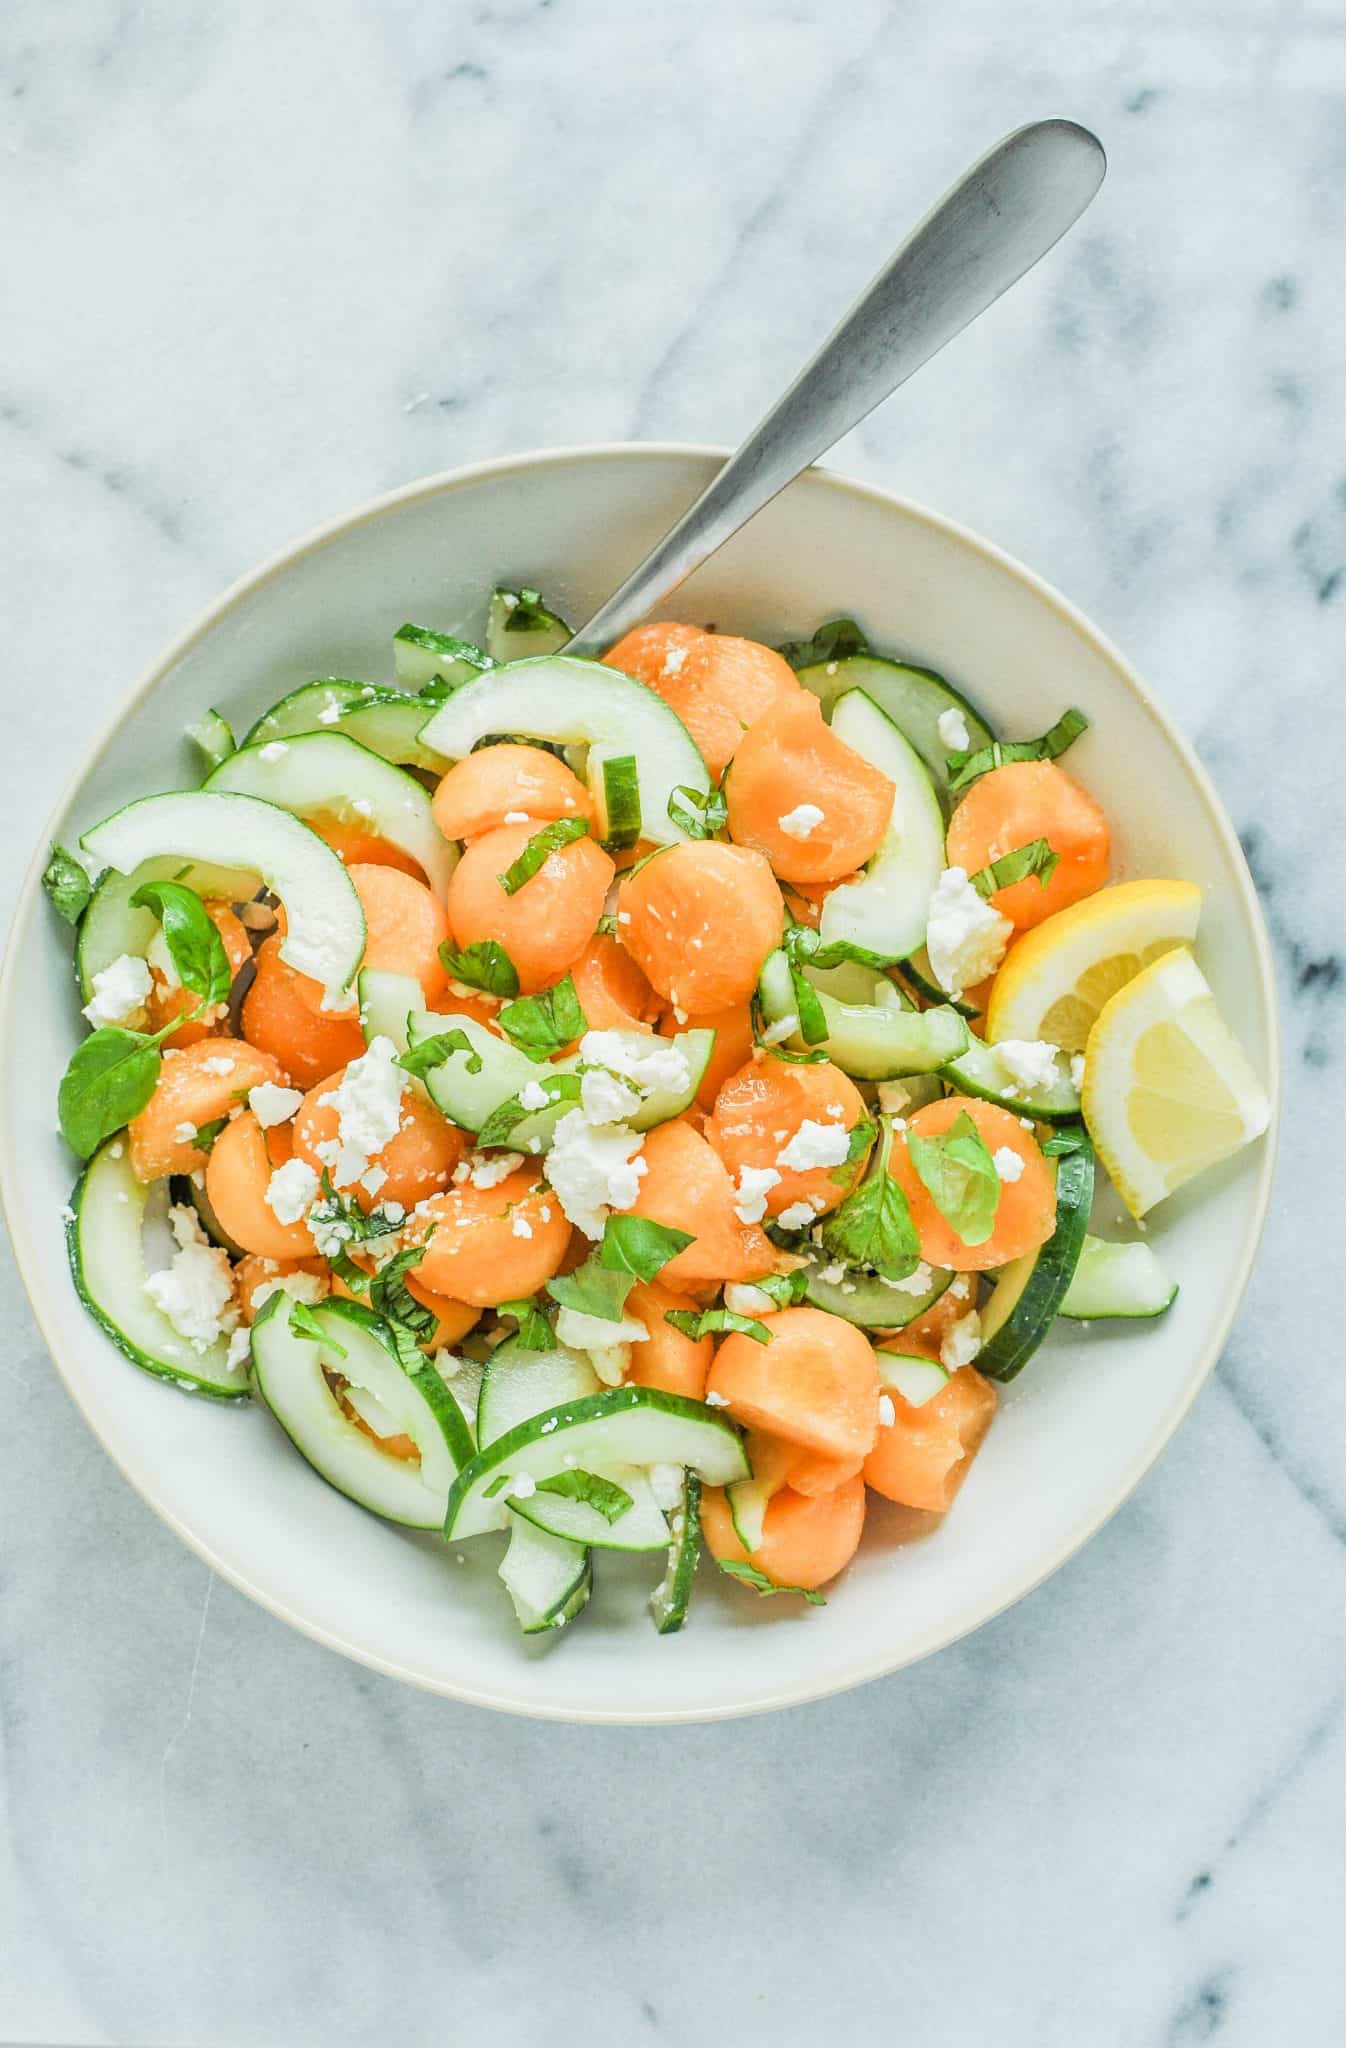 Cantaloupe Cucumber Salad Recipe - This Healthy Table